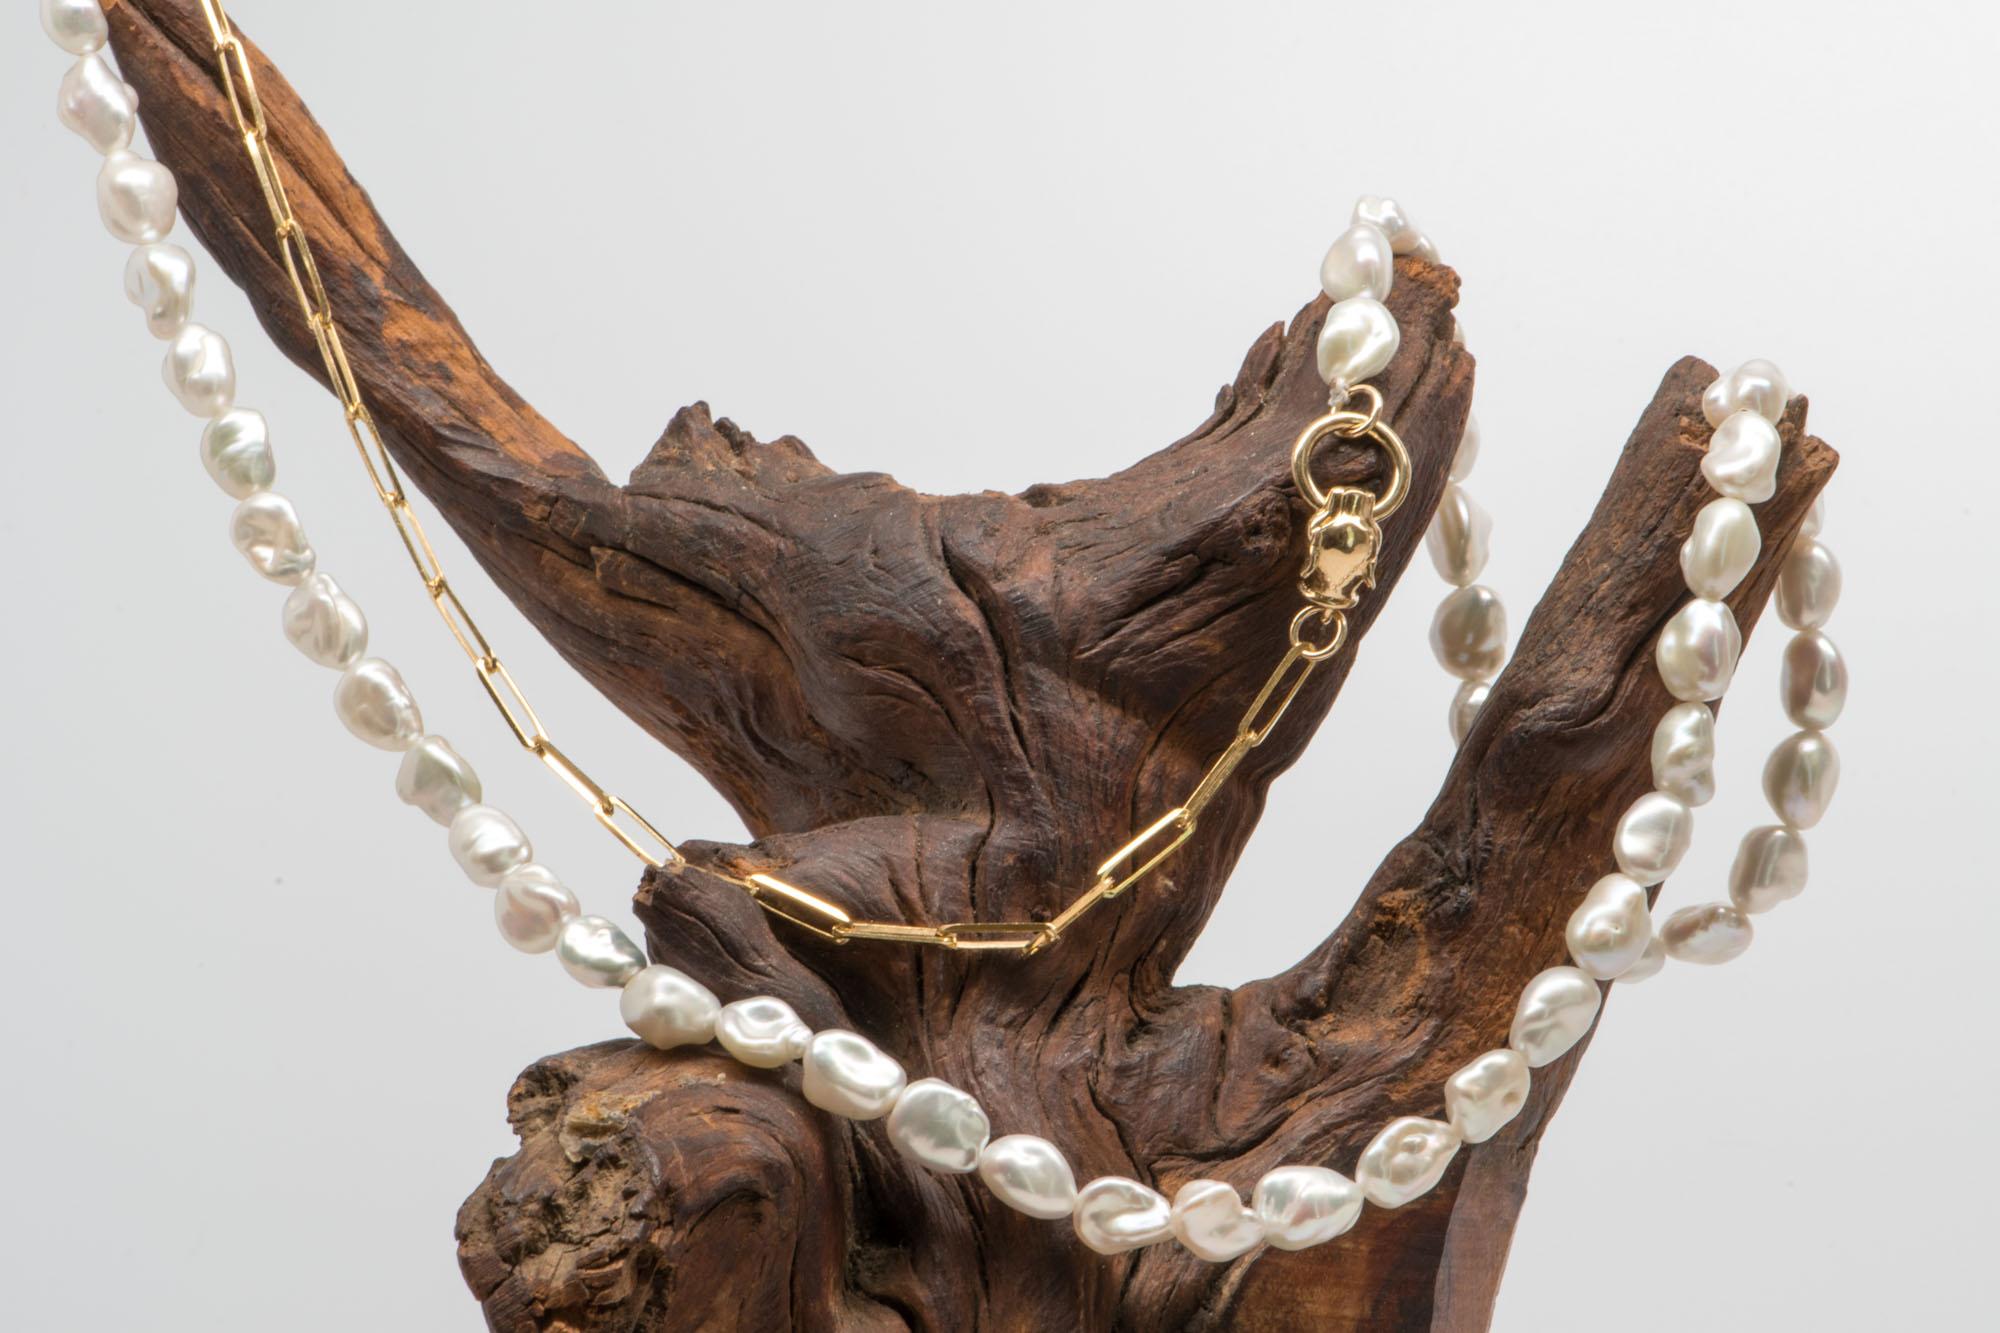 ♥  This is a beautiful necklace strung with top quality freshwater pearls attached to a solid 14k yellow gold paper clip chain with a panther pendant clasp
♥  The necklace is 24 inches in length. 

♥  Material: 14K Yellow Gold
♥  Gemstone: